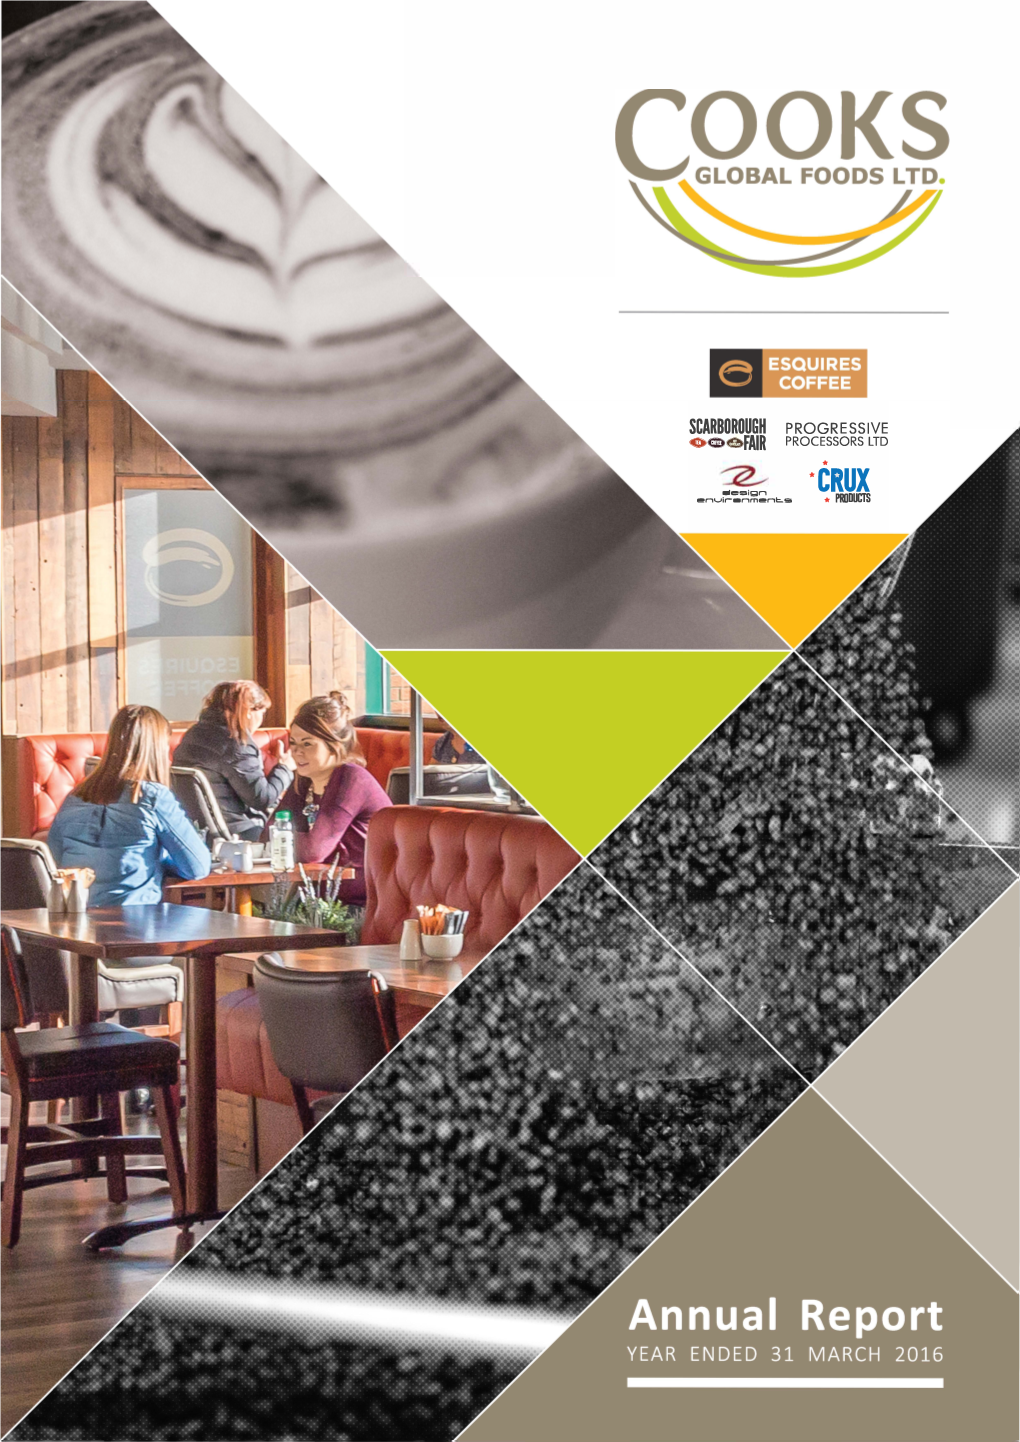 ·Crux* Piijducis Cooks Global Foods 2016 Annual Report